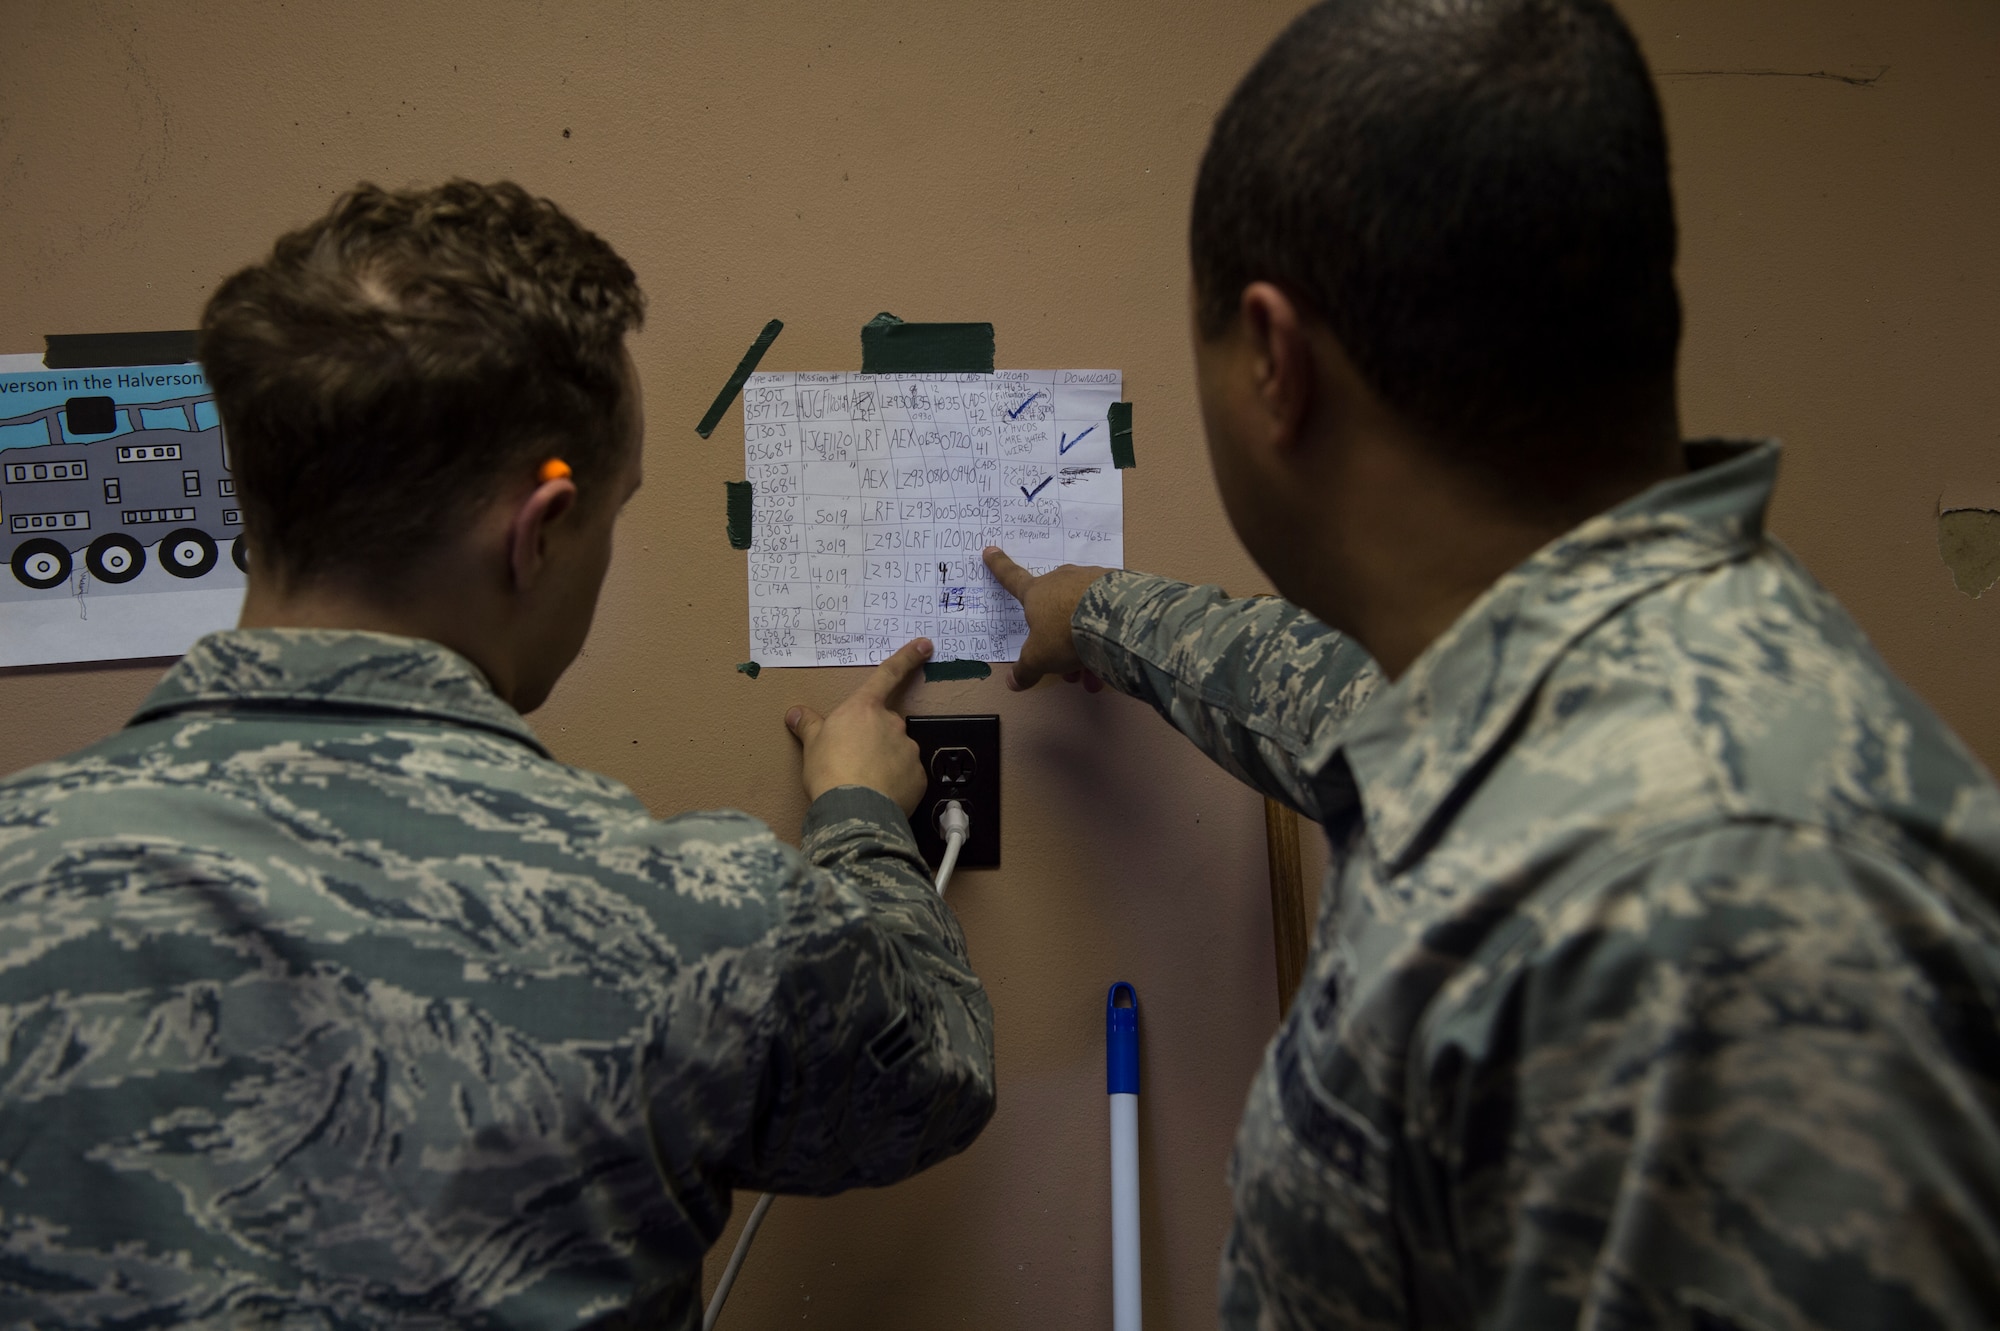 Members of the 571st Contingency Response Group stationed at Travis Air Force Base, Calif., look at a schedule during a training exercise at the Joint Readiness Training Center at Fort Polk, La., Jan. 19, 2015. JRTC is a 34th Combat Training Squadron exercise for the U.S. Army that improves unit readiness by providing realistic, stressful, joint and combined arms training across the full spectrum of conflict. The Airmen helped support the exercise, and also provided an opportunity for internal training. (U.S. Air Force photo/Staff Sgt. Gustavo Gonzalez/RELEASED)